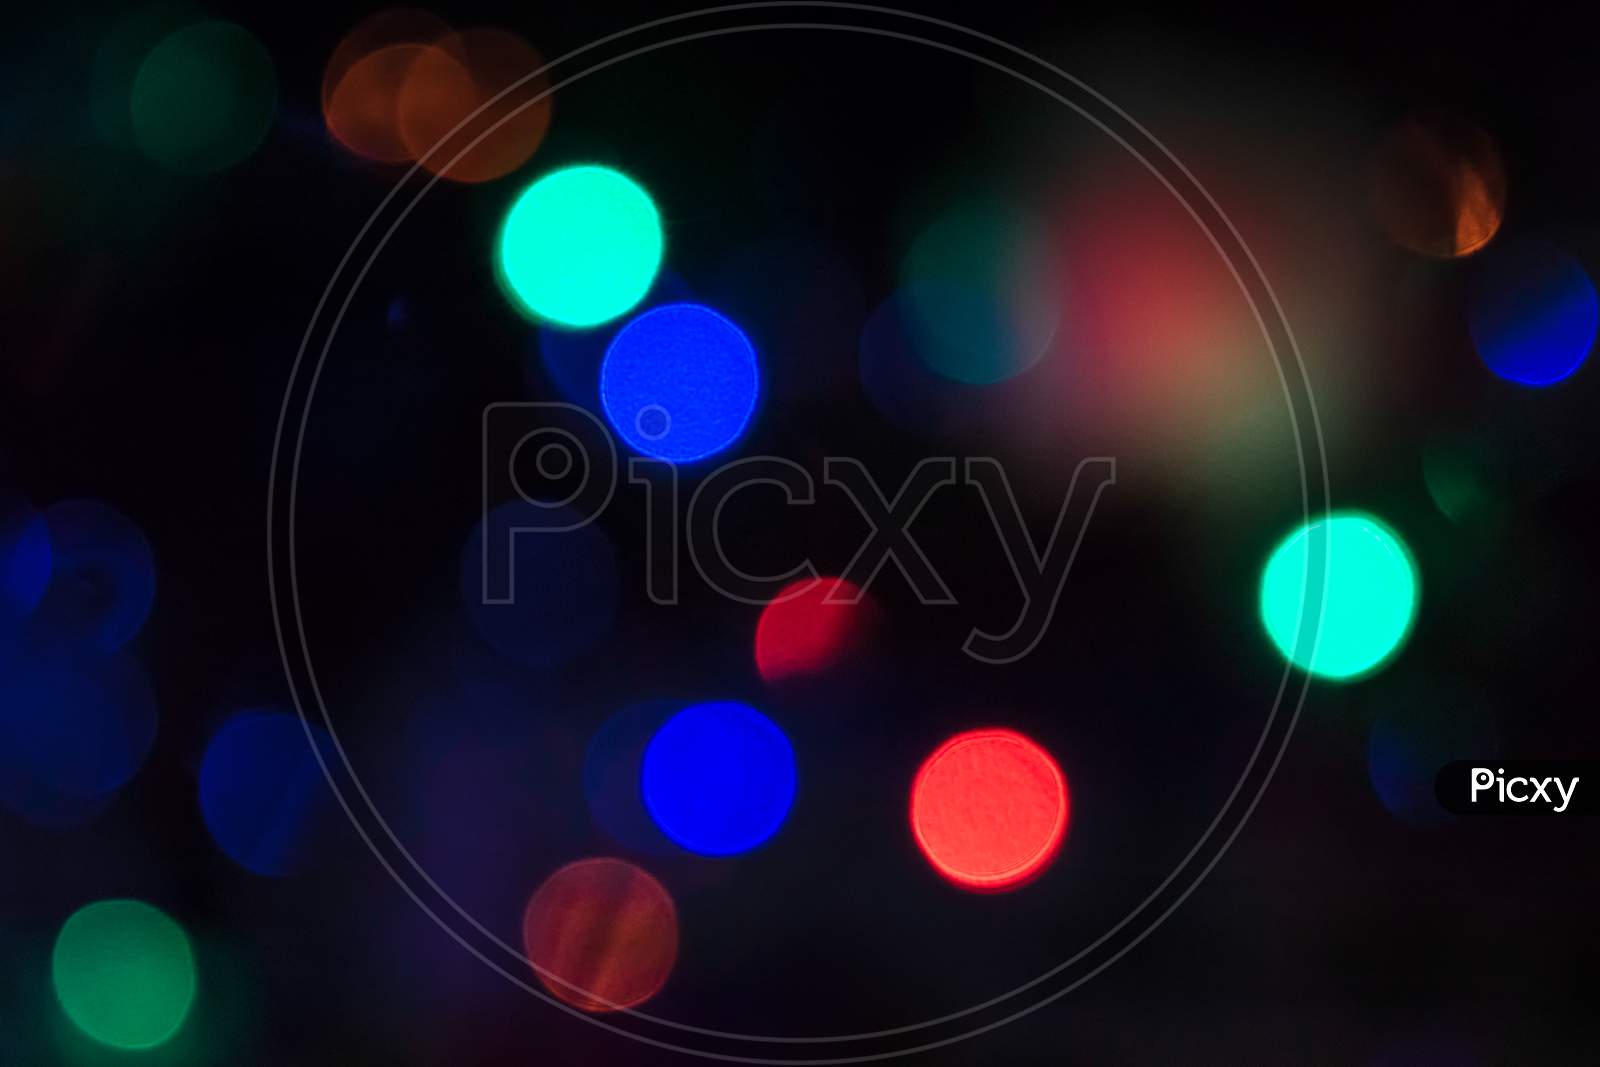 Out Of Focus Christmas Lights